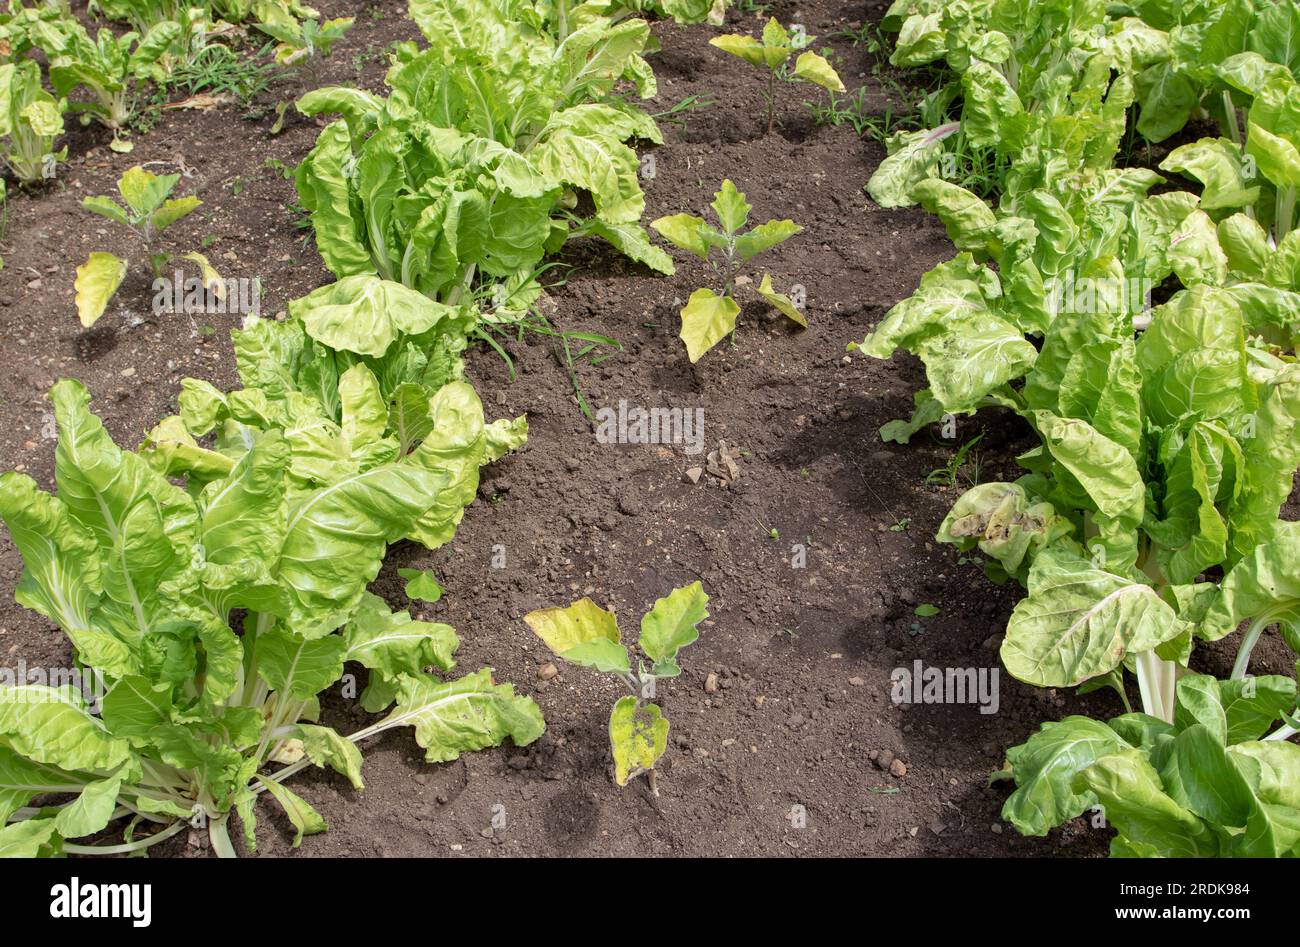 Companion plants at the vegetable bed. Chard and eggplant. Organic gardening.Pests control. Stock Photo